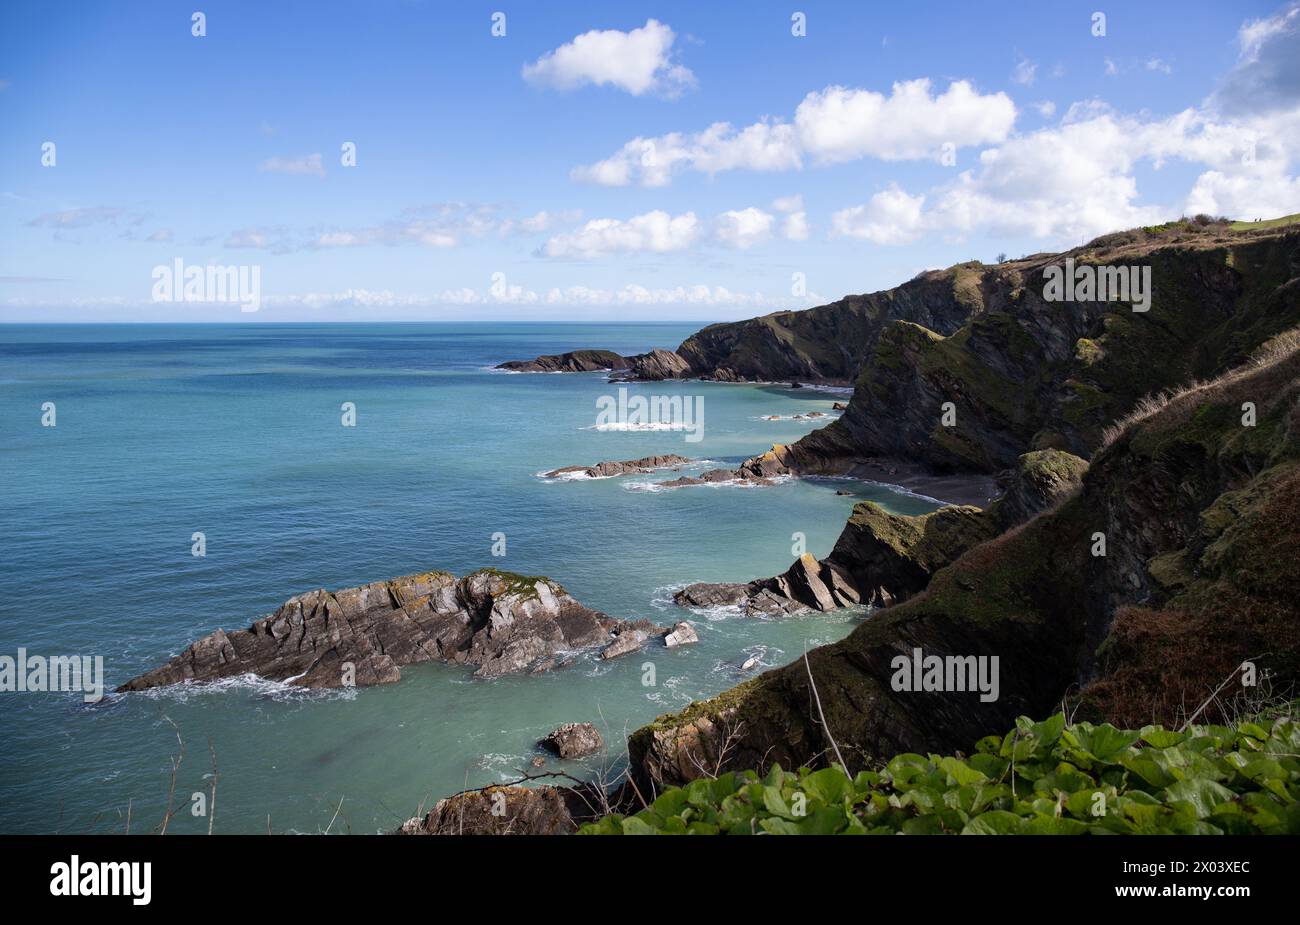 Cliffs stretching to the blue ocean in Combe Martin, Devon, England Stock Photo